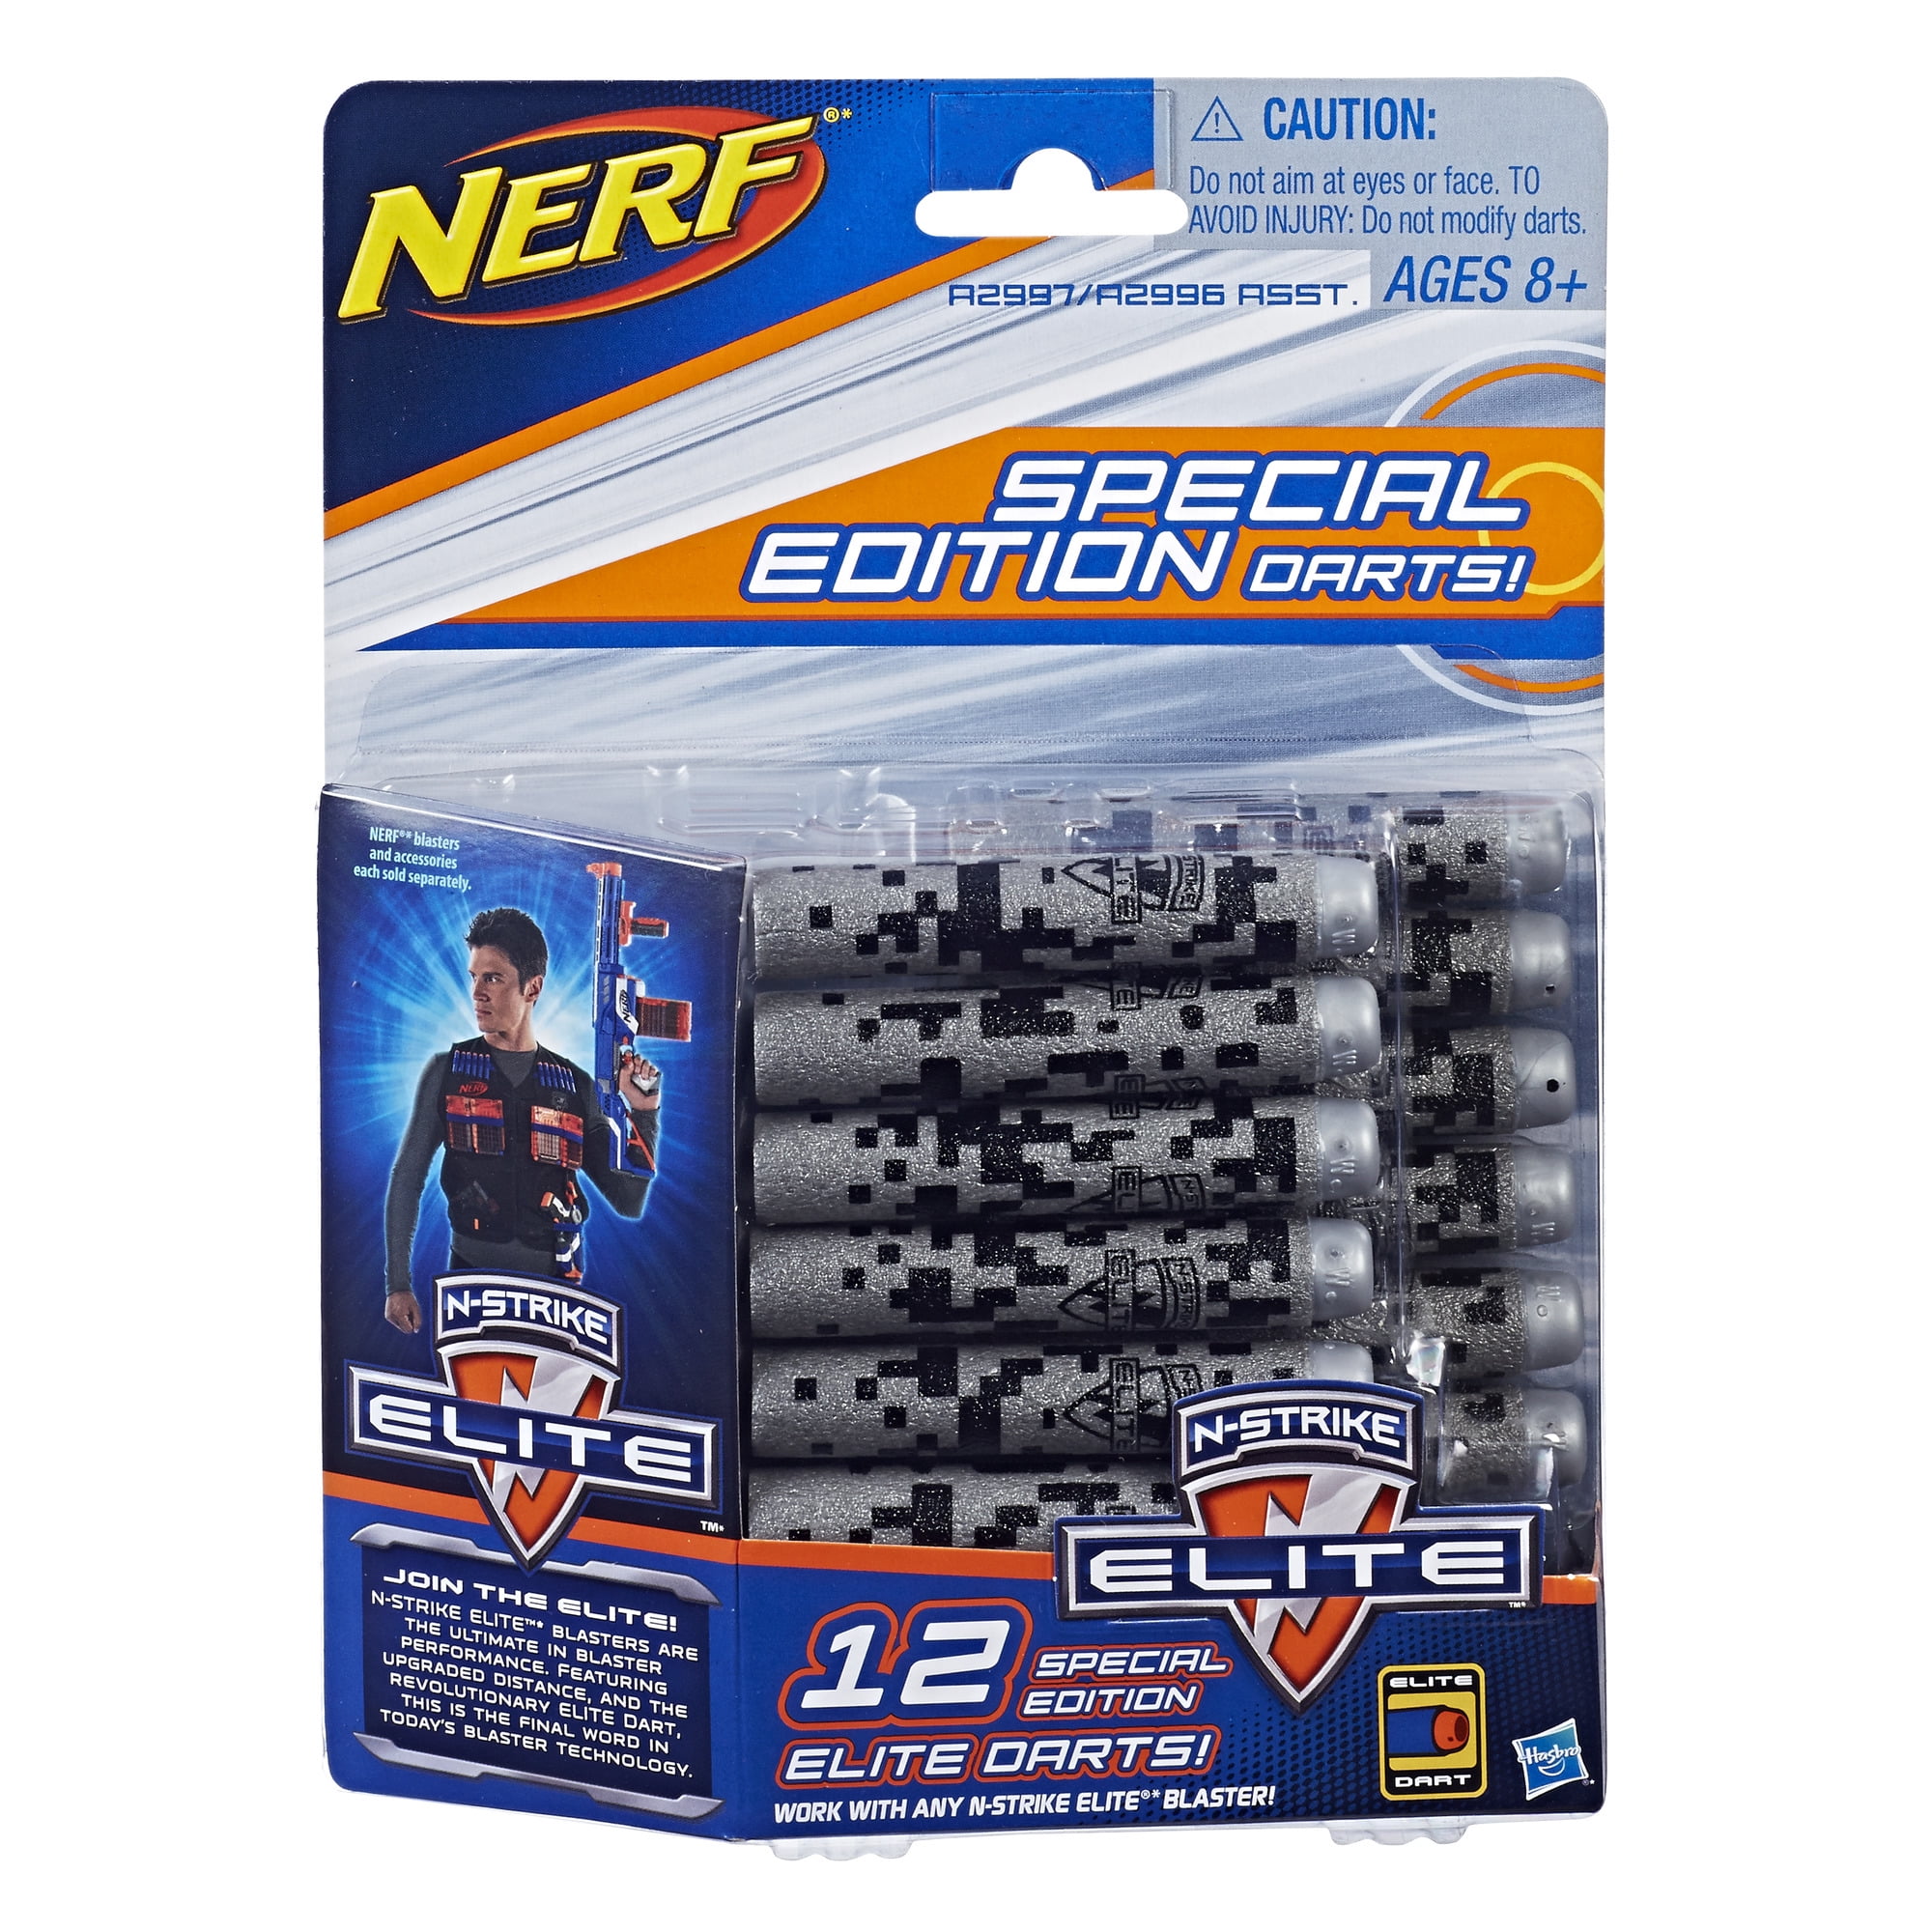 NERF N-strike Elite Special Edition 12 Dart Refill by Hasbro A2997 for sale online 